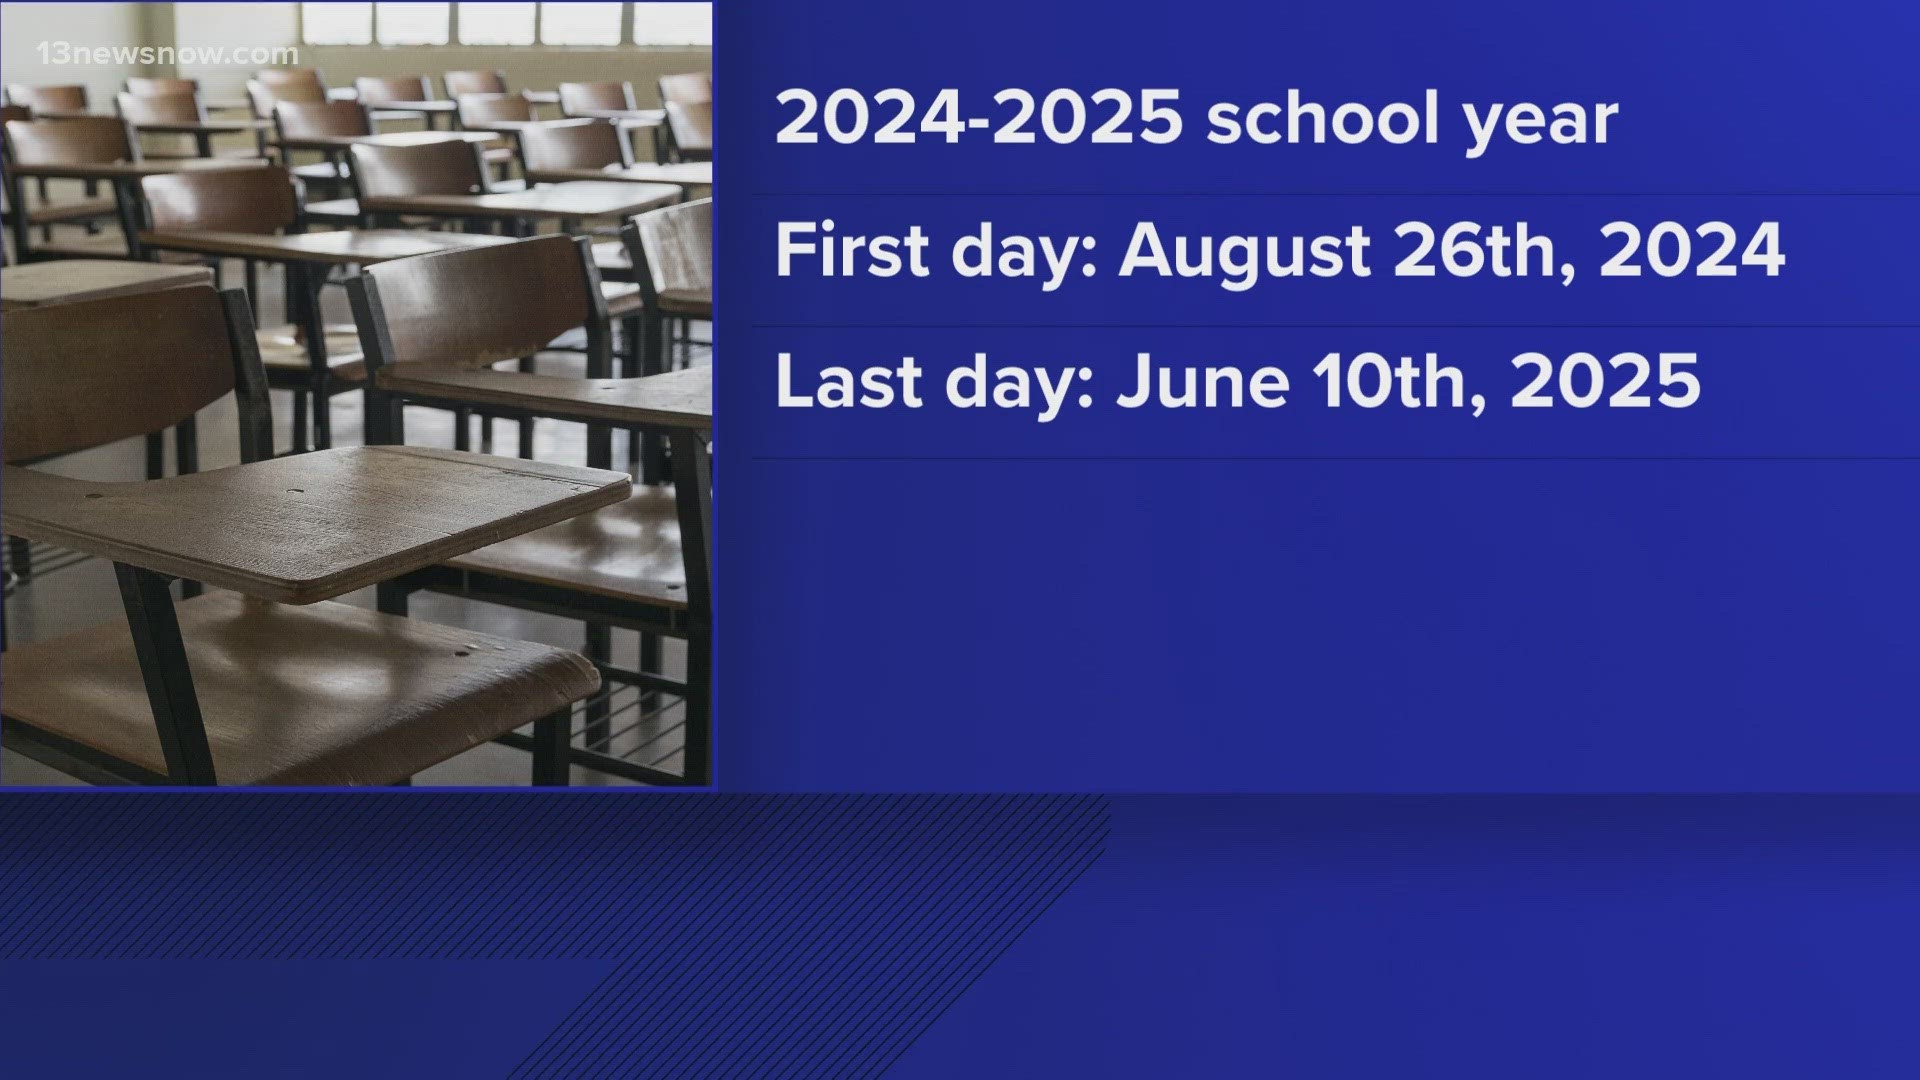 The first day of school will be Monday, August 26.